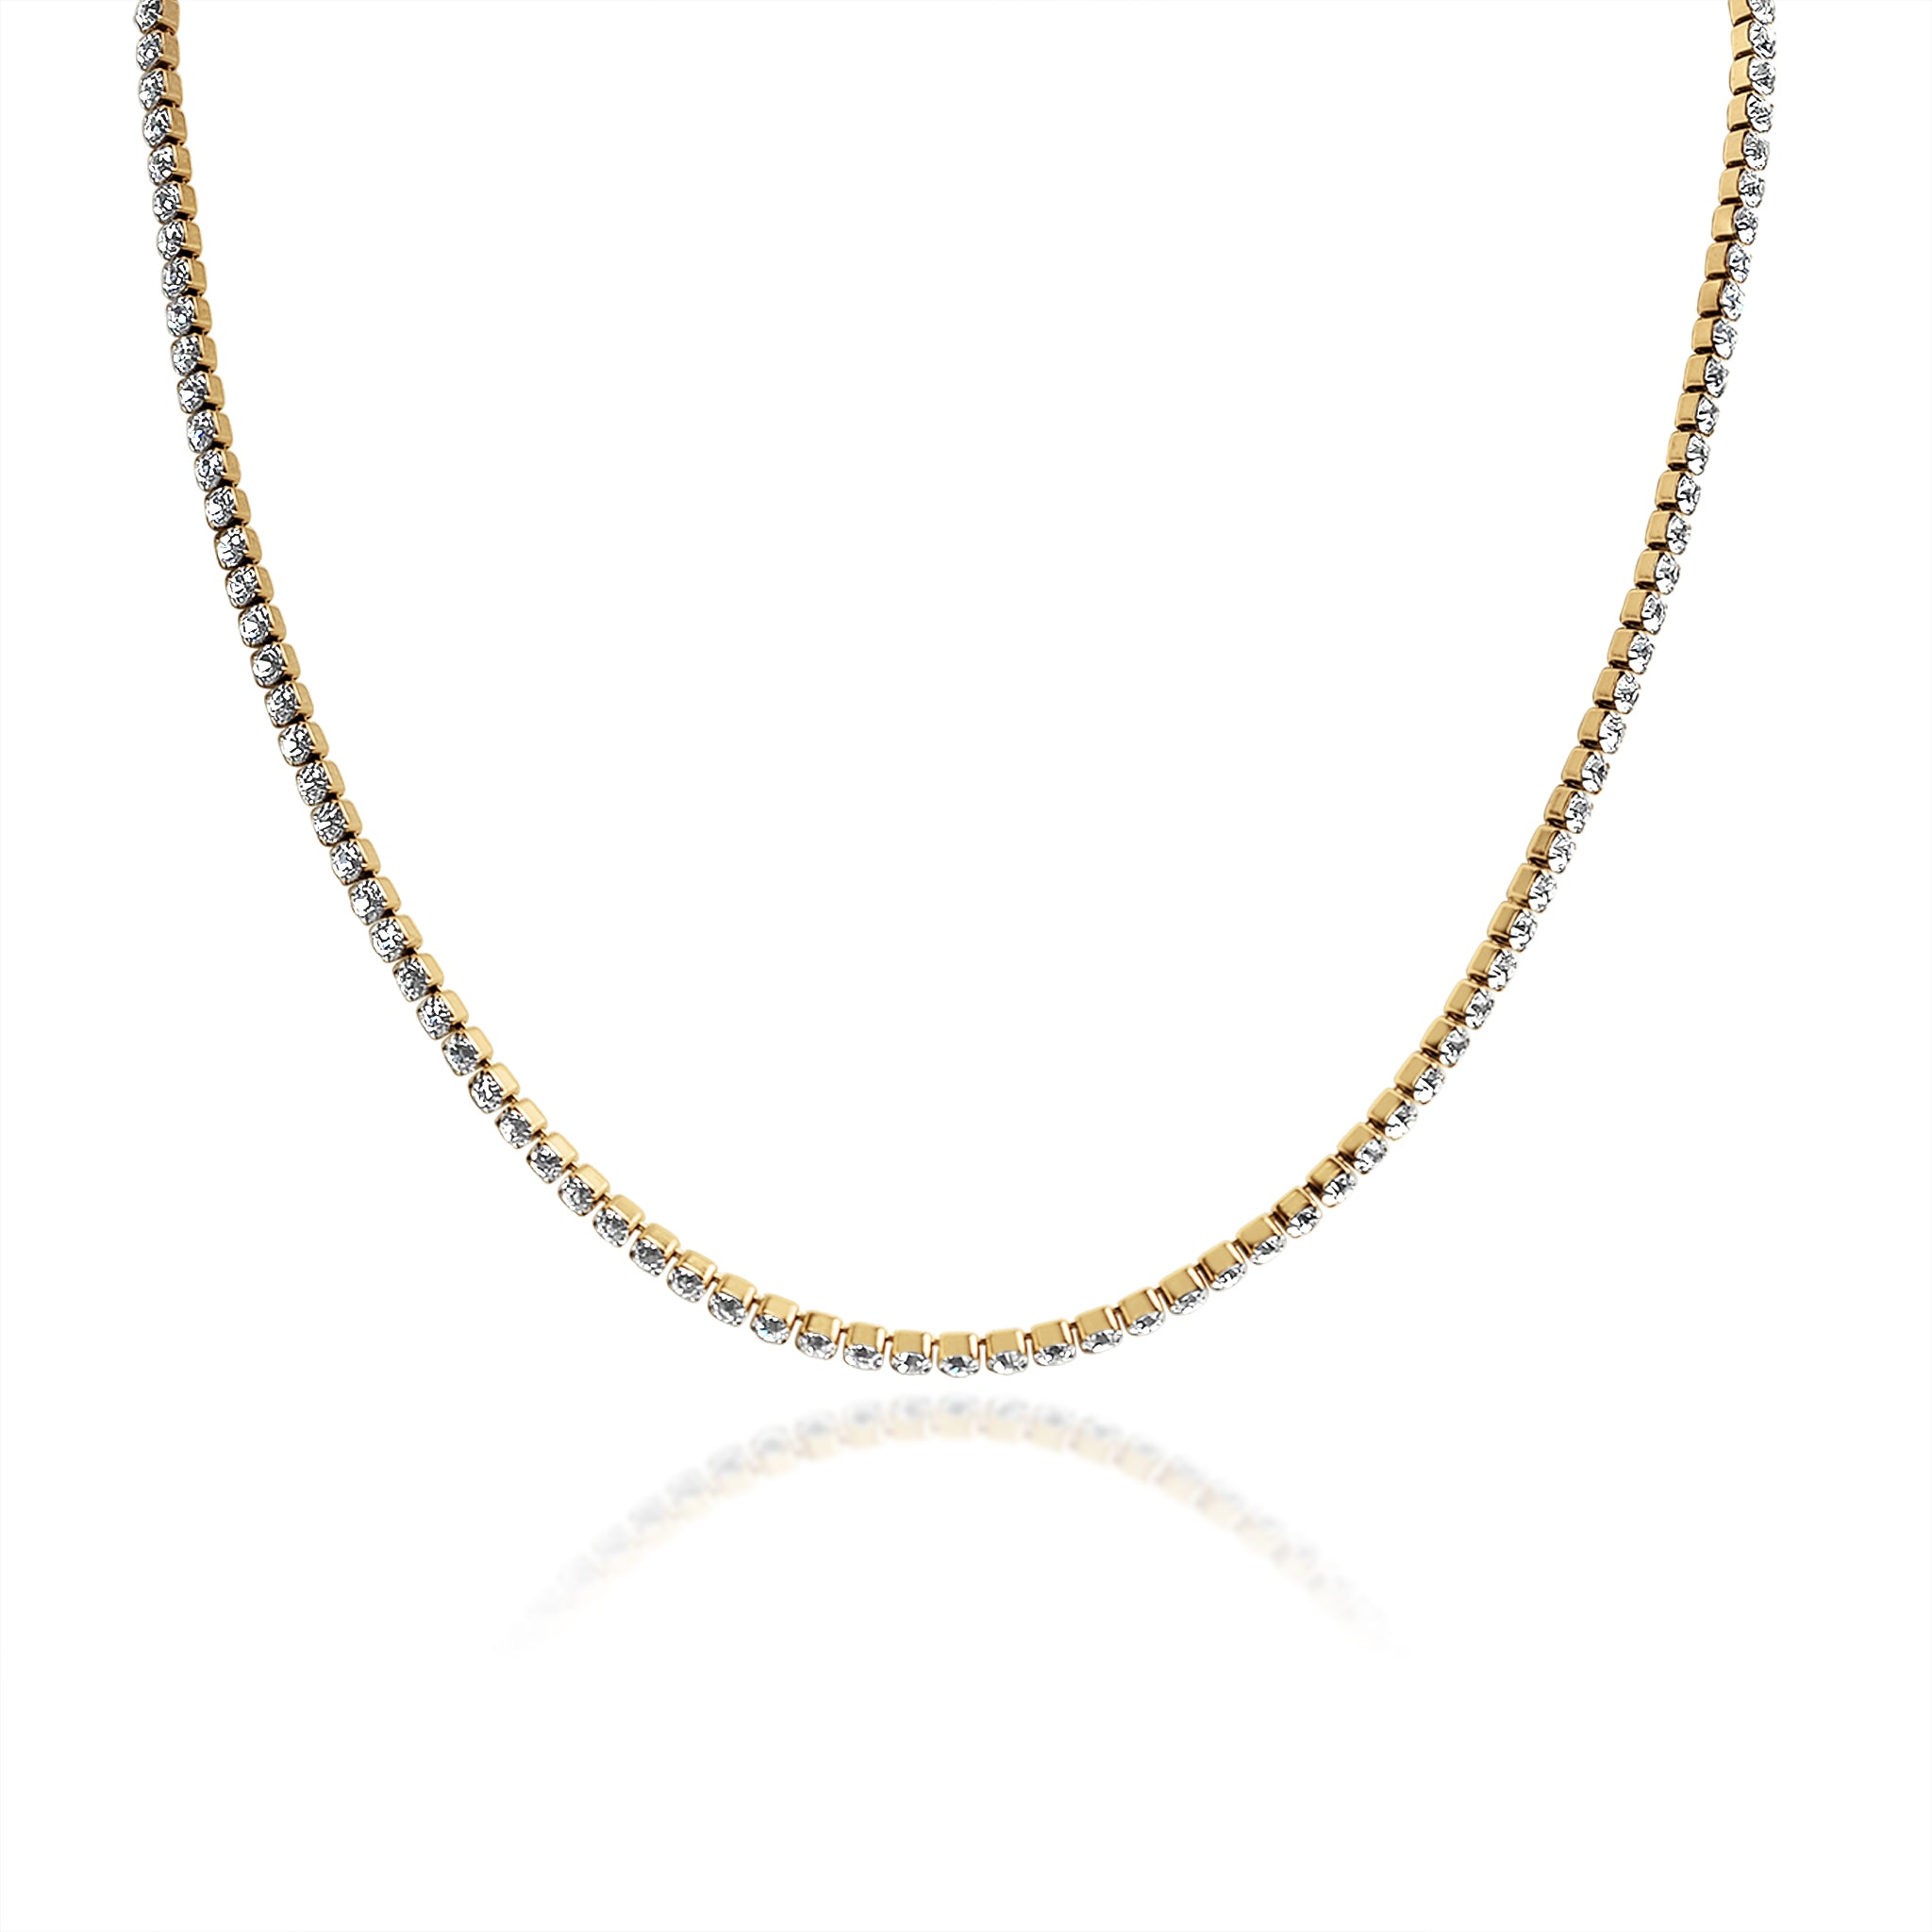 ''18k Gold PVD Coated Stainless Steel CZ Tennis Chain NECKLACE With 2'''' Extension / TNN0002''